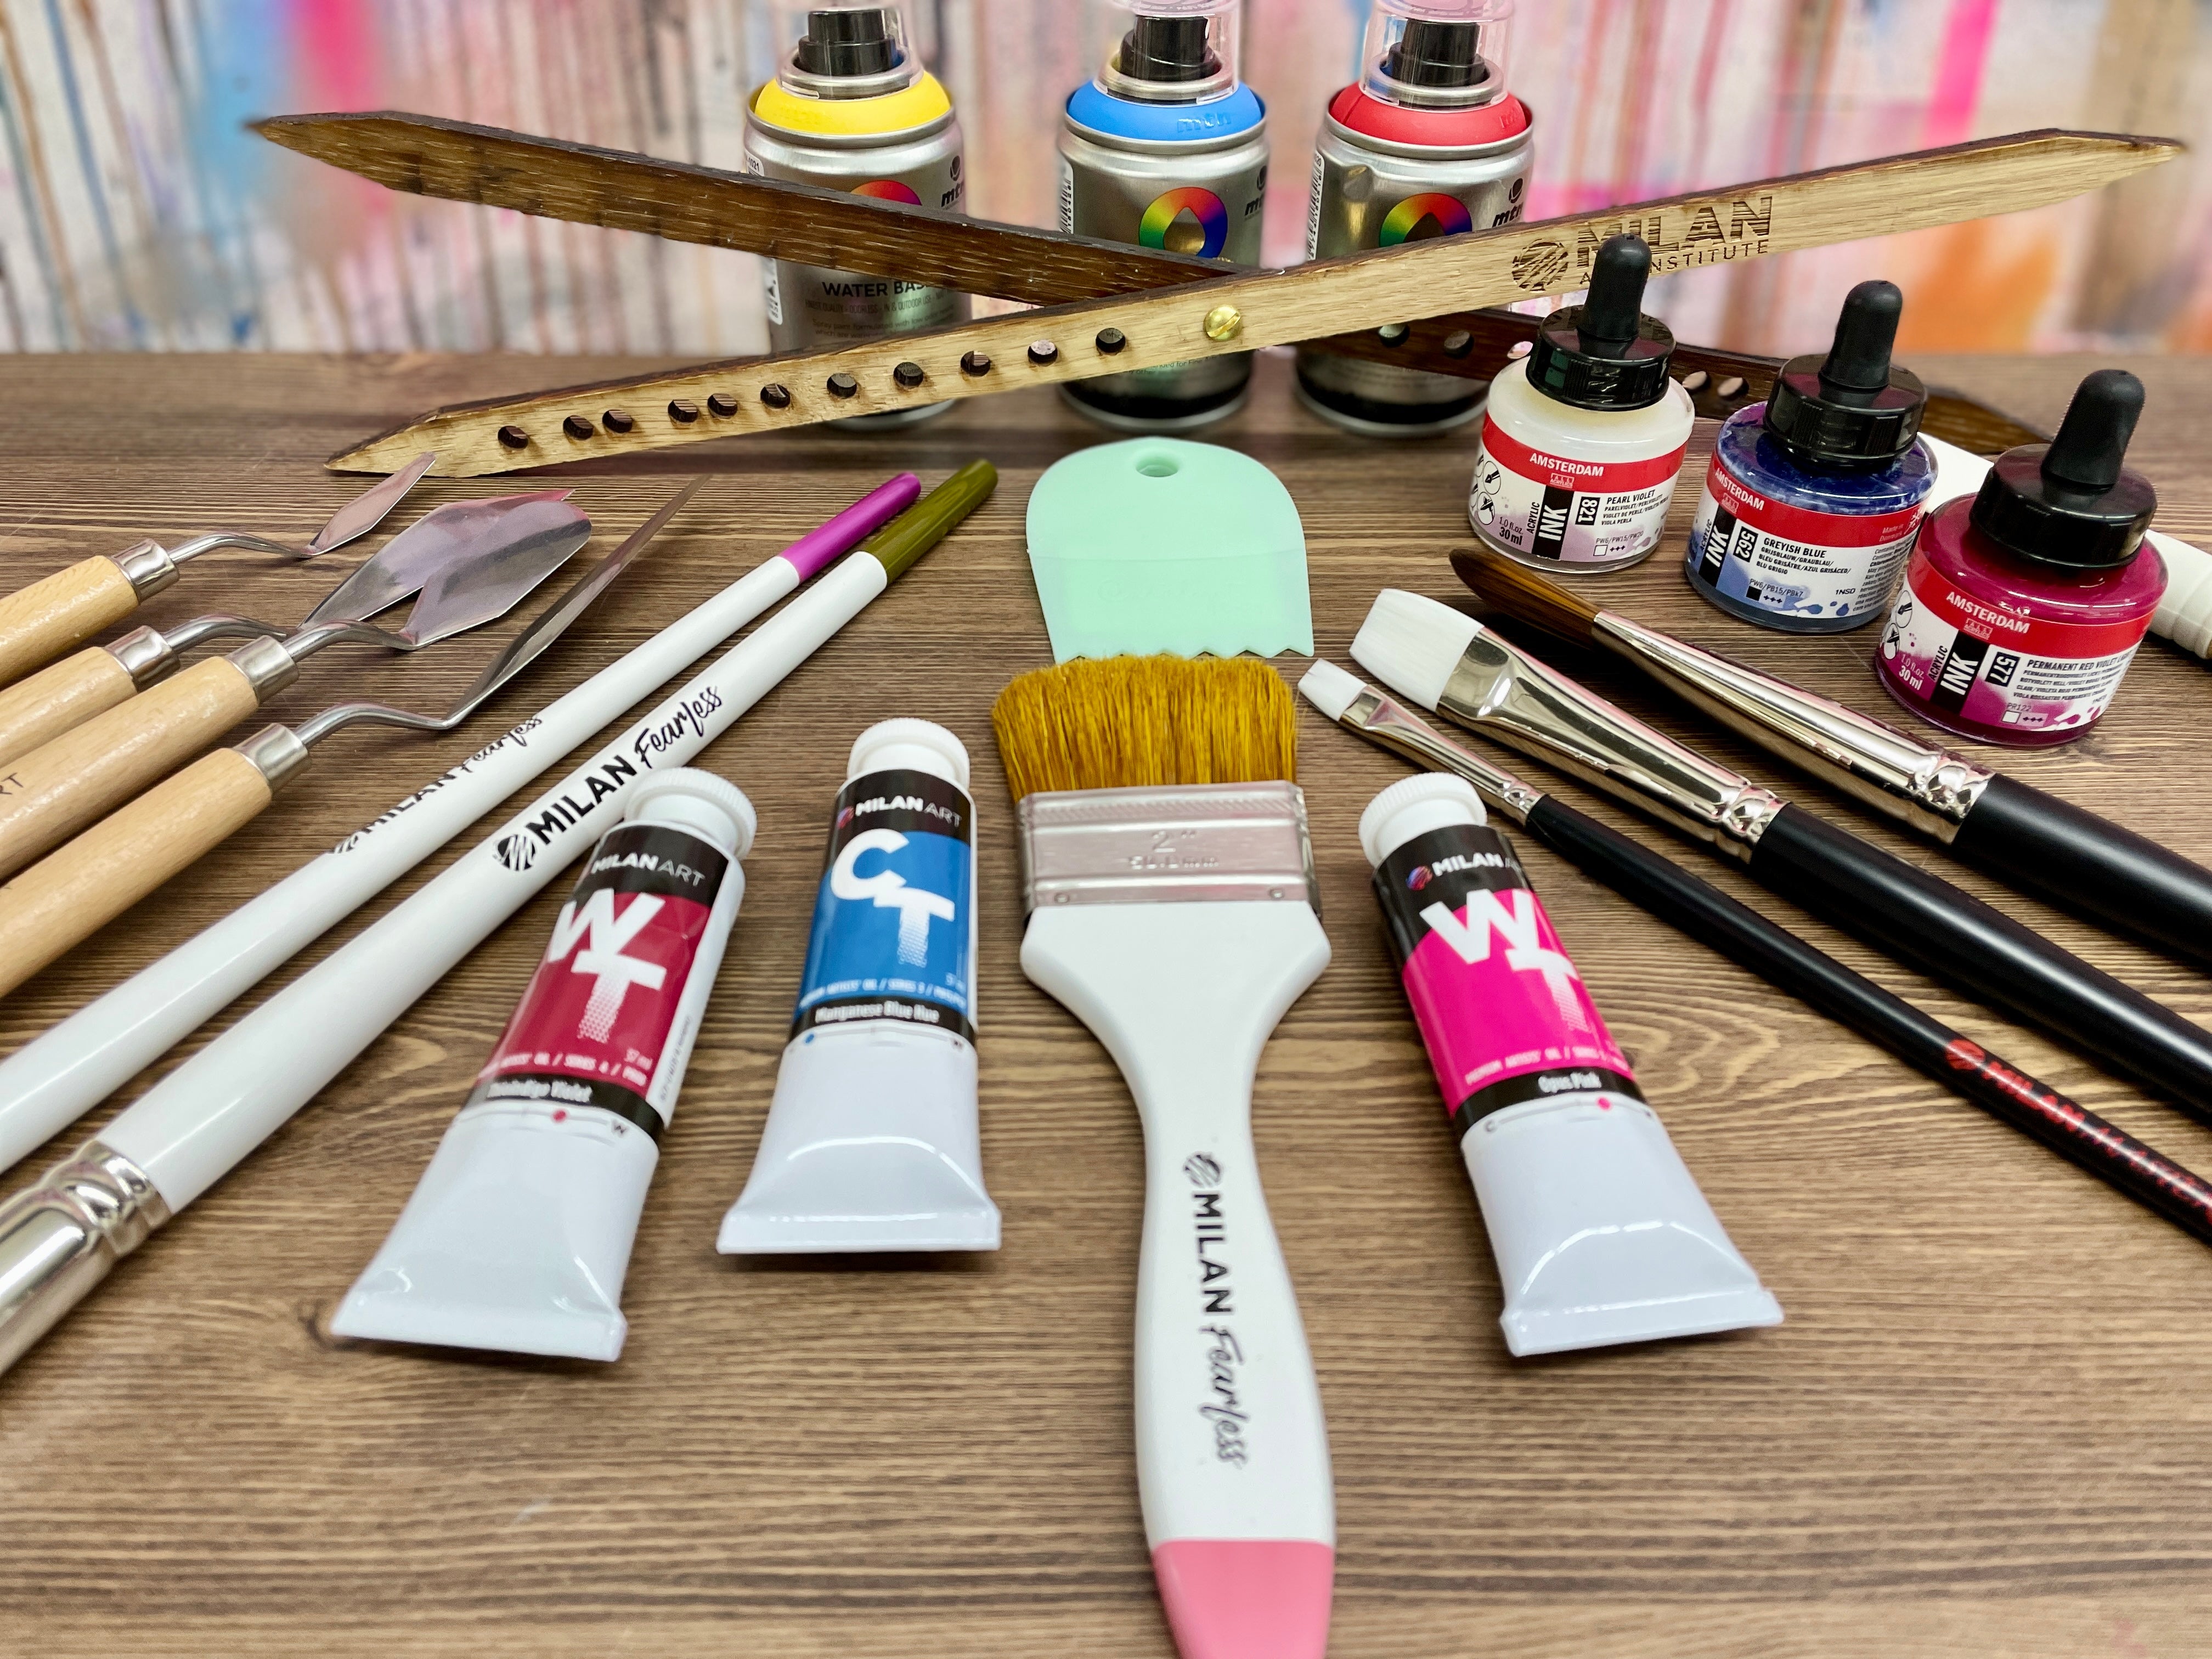 The Best Art Supplies for Kids - A Guide to Keeping it Simple